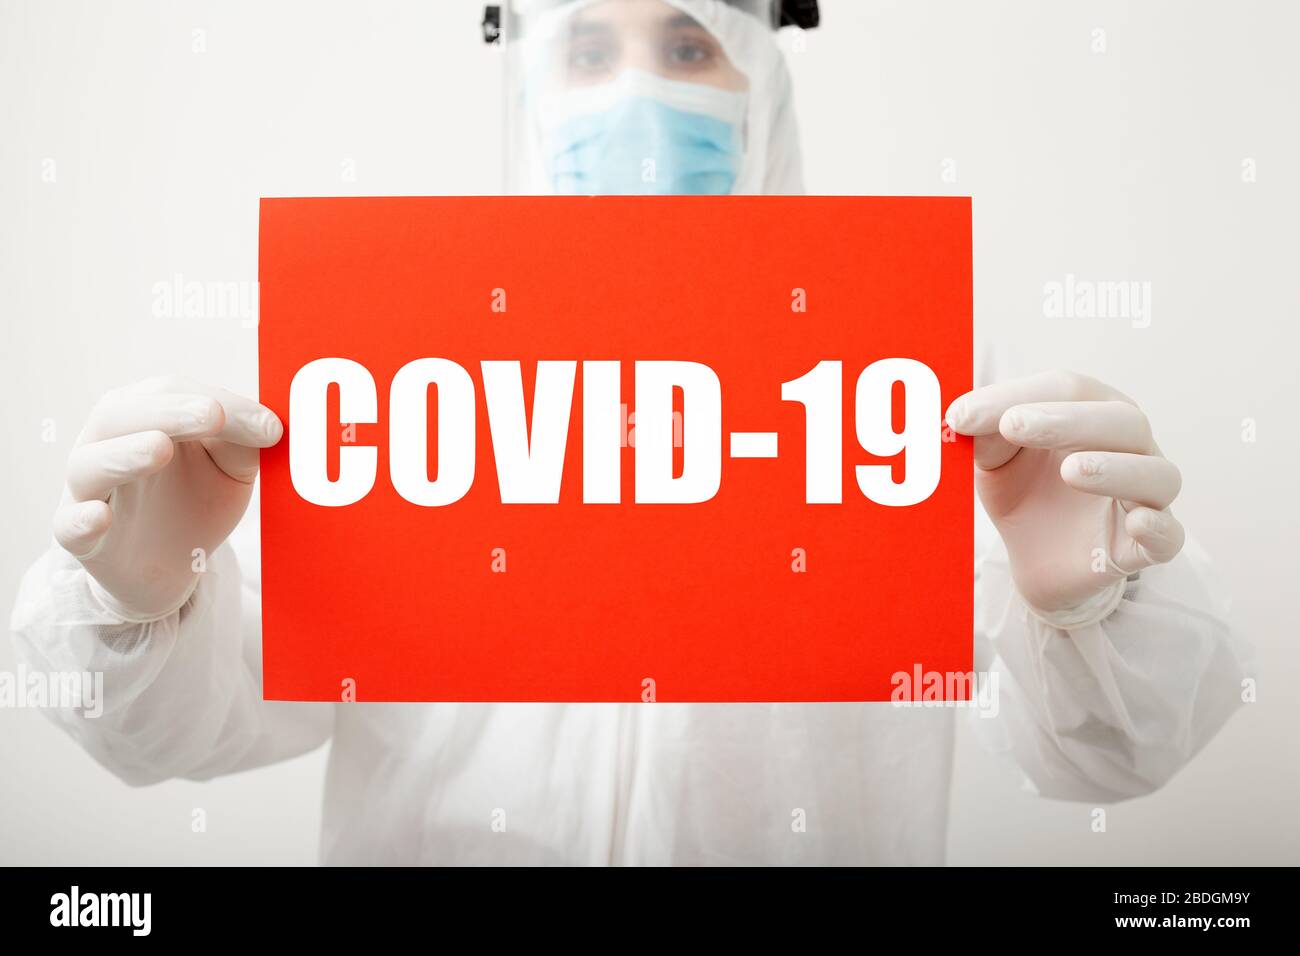 Text covid-19 on red warning sign in doctors hands. Coronavirus protection. Doctor in protective medical suit, biological hazard, mask on white Stock Photo